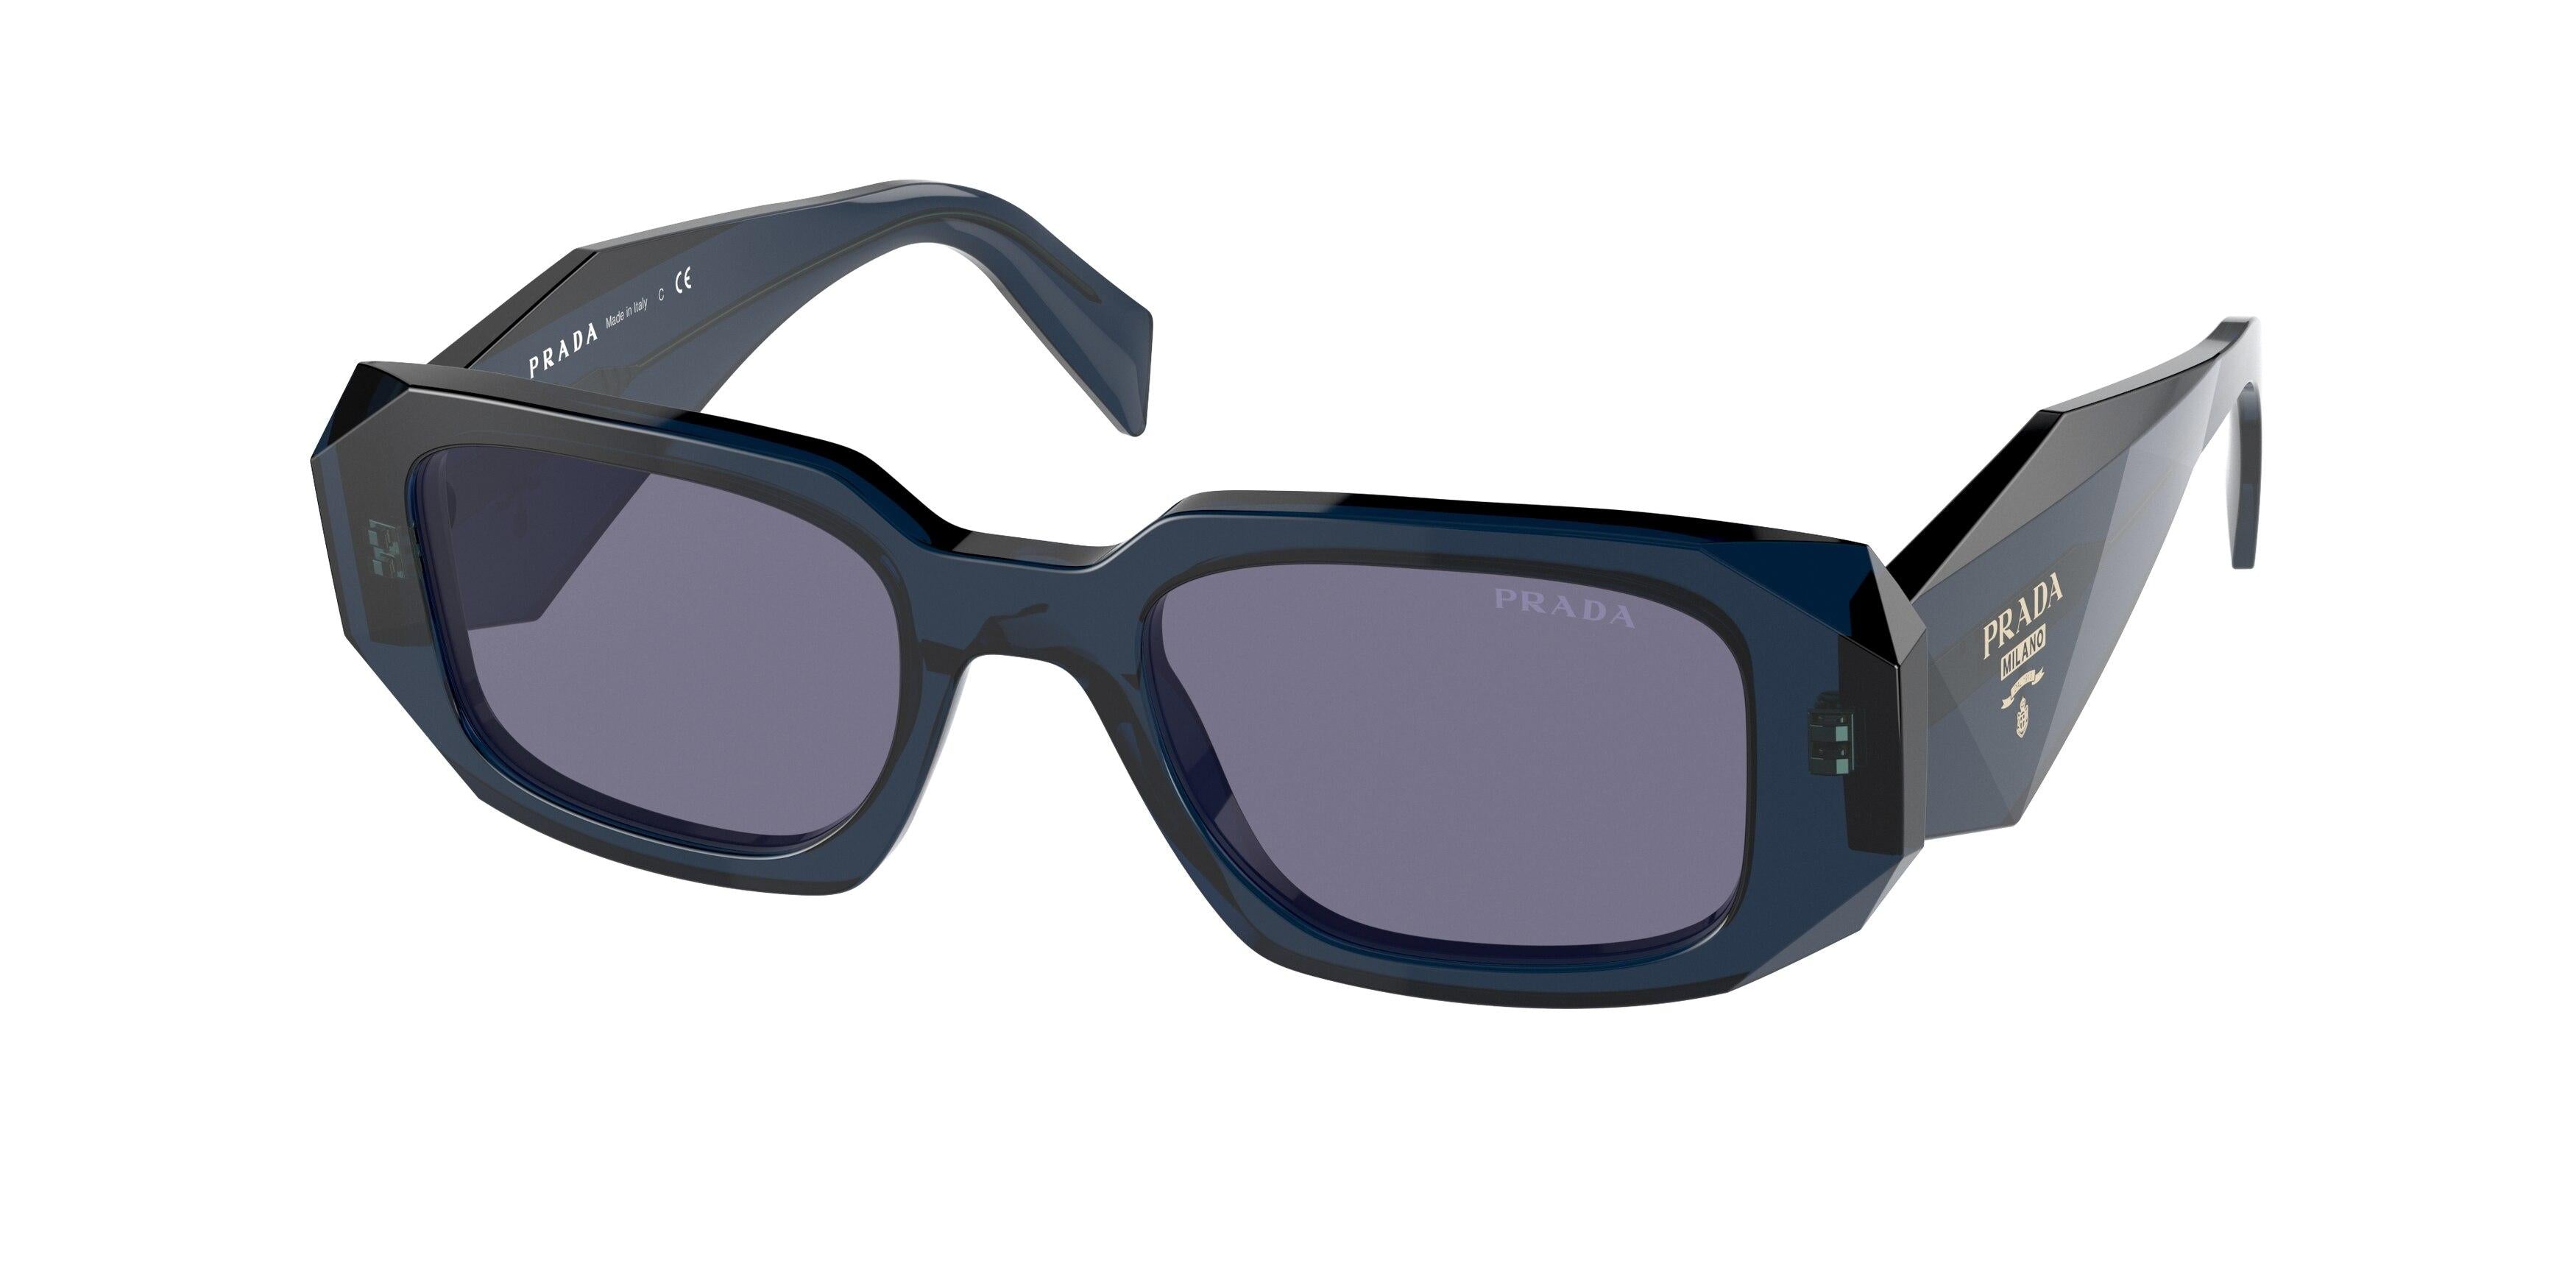 Add a Touch of Luxury to Your Outfit with the Prada 17WS Symbole Sungl